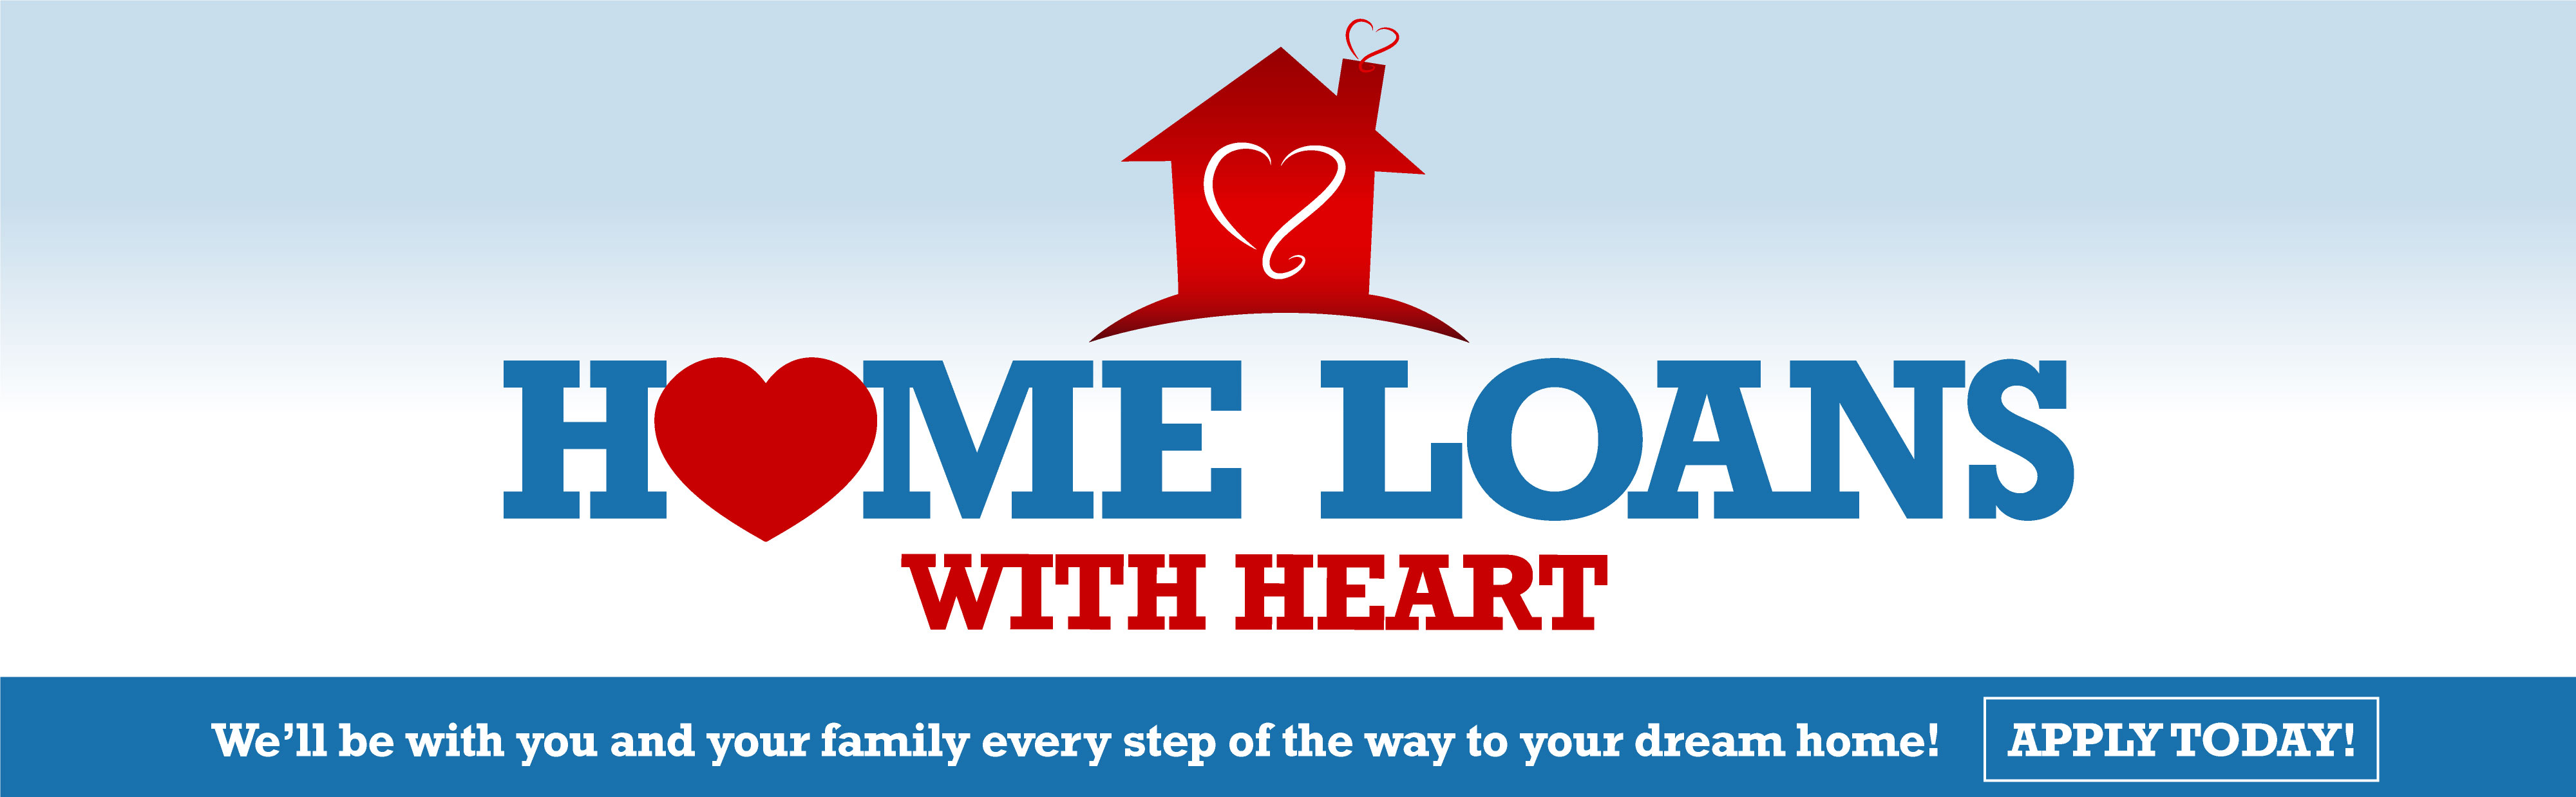 Home Loans with Heart.